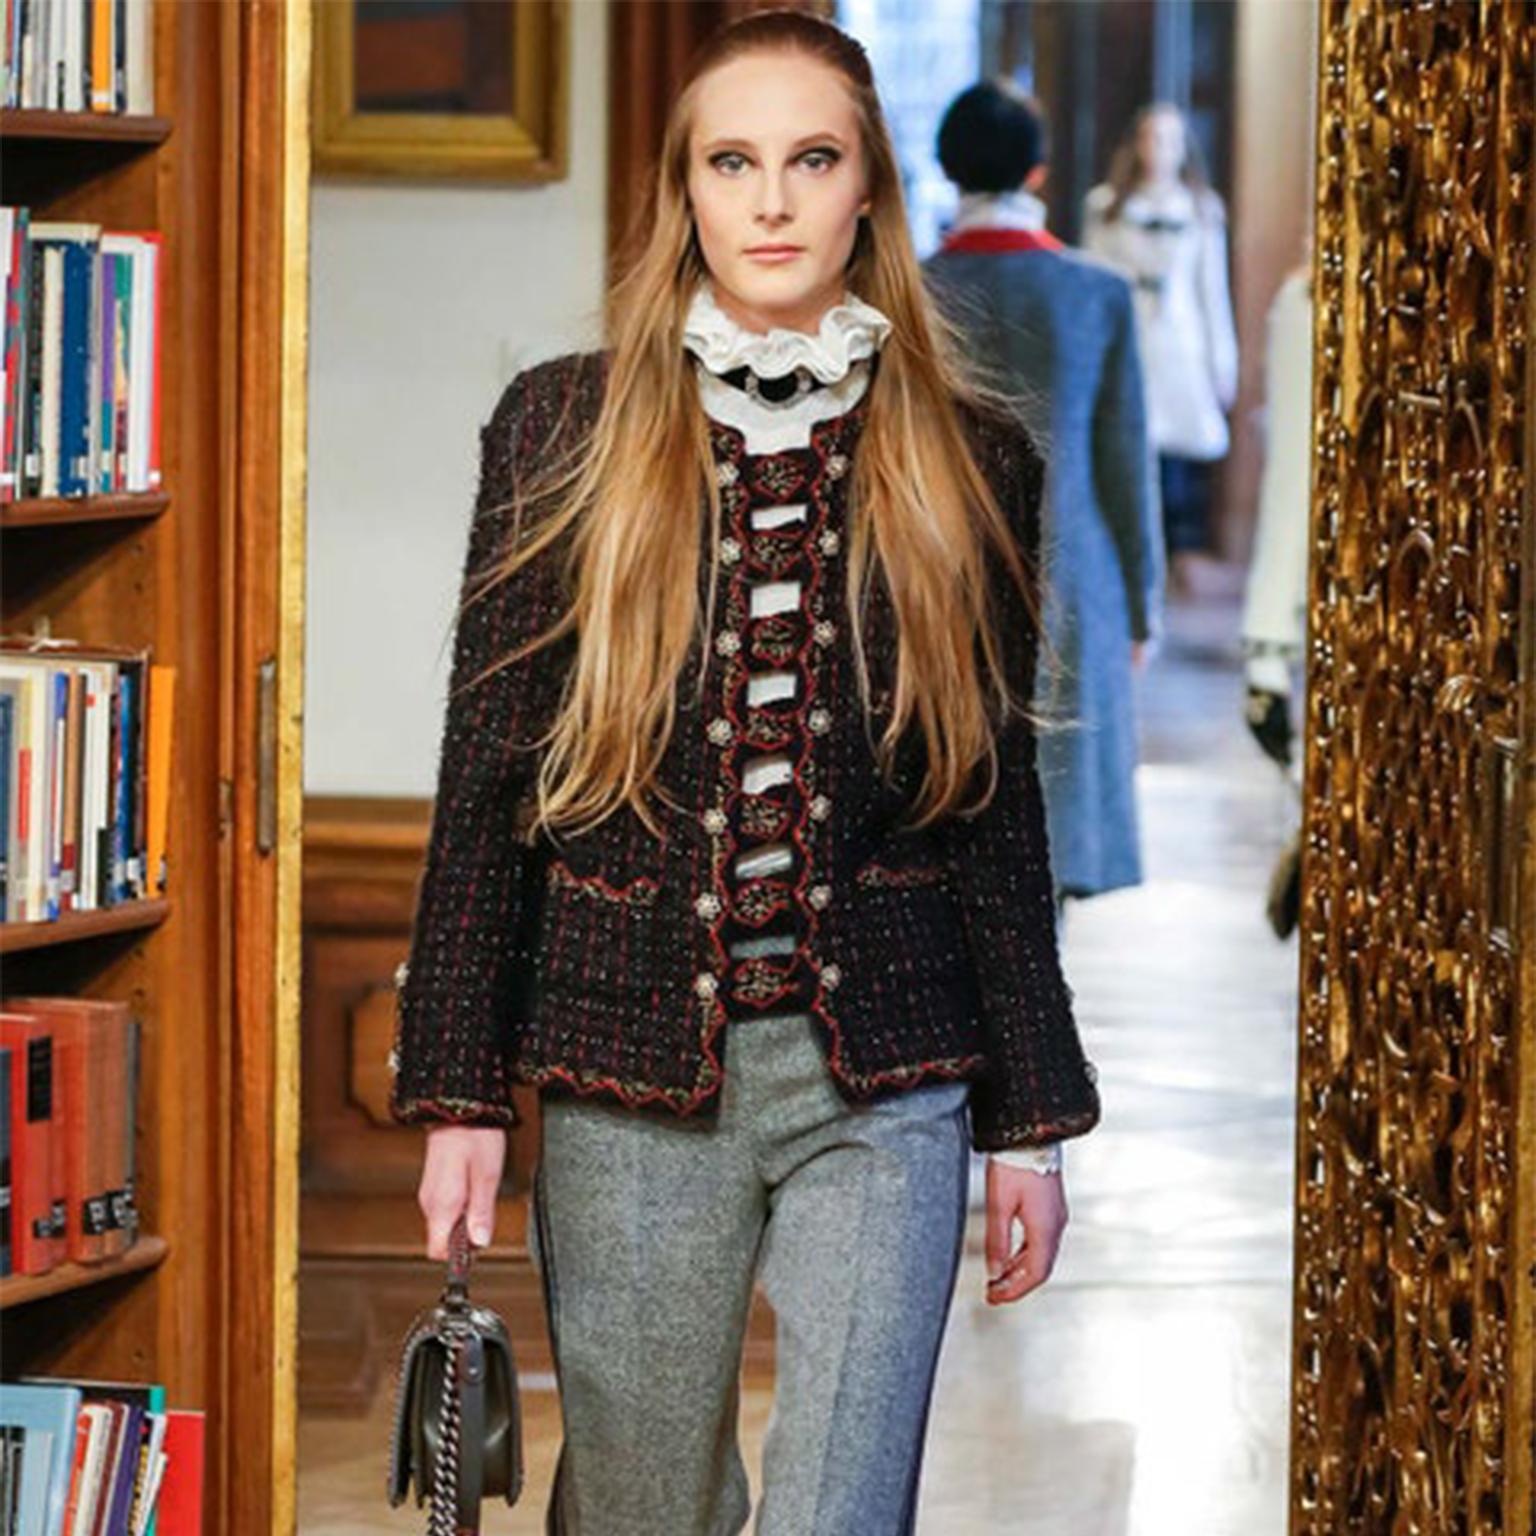 This truly sensational Chanel navy and red Lesage tweed jacket is from the Pre-Fall 2015 Chanel Paris Salzburg collection. This fabulous runway show was at Schloss Leopoldskron, the 18th Century Austrian castle, acclaimed for its romantic Rococo